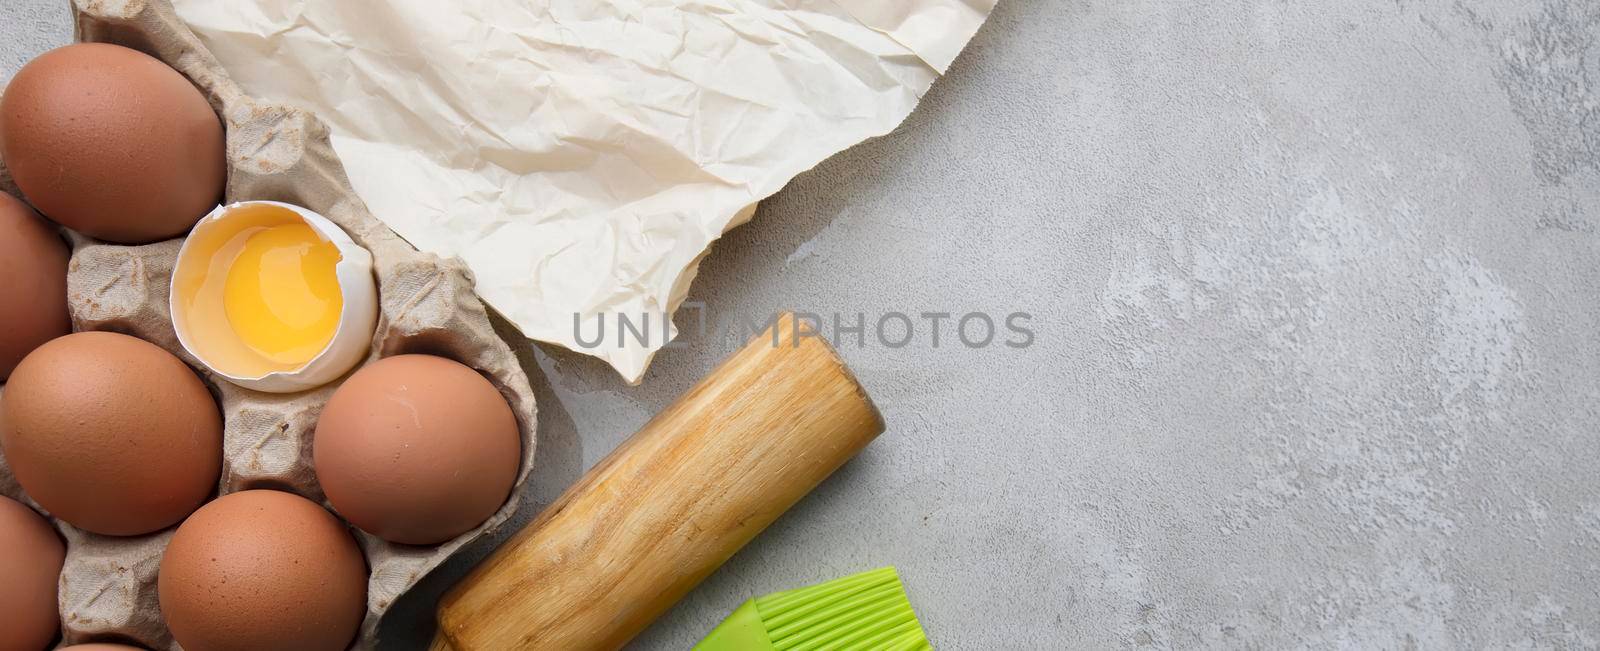 Baking cooking ingredients flour eggs rolling pin and kitchen textiles on gray concrete background. Cookie pie or cake recipe mockup